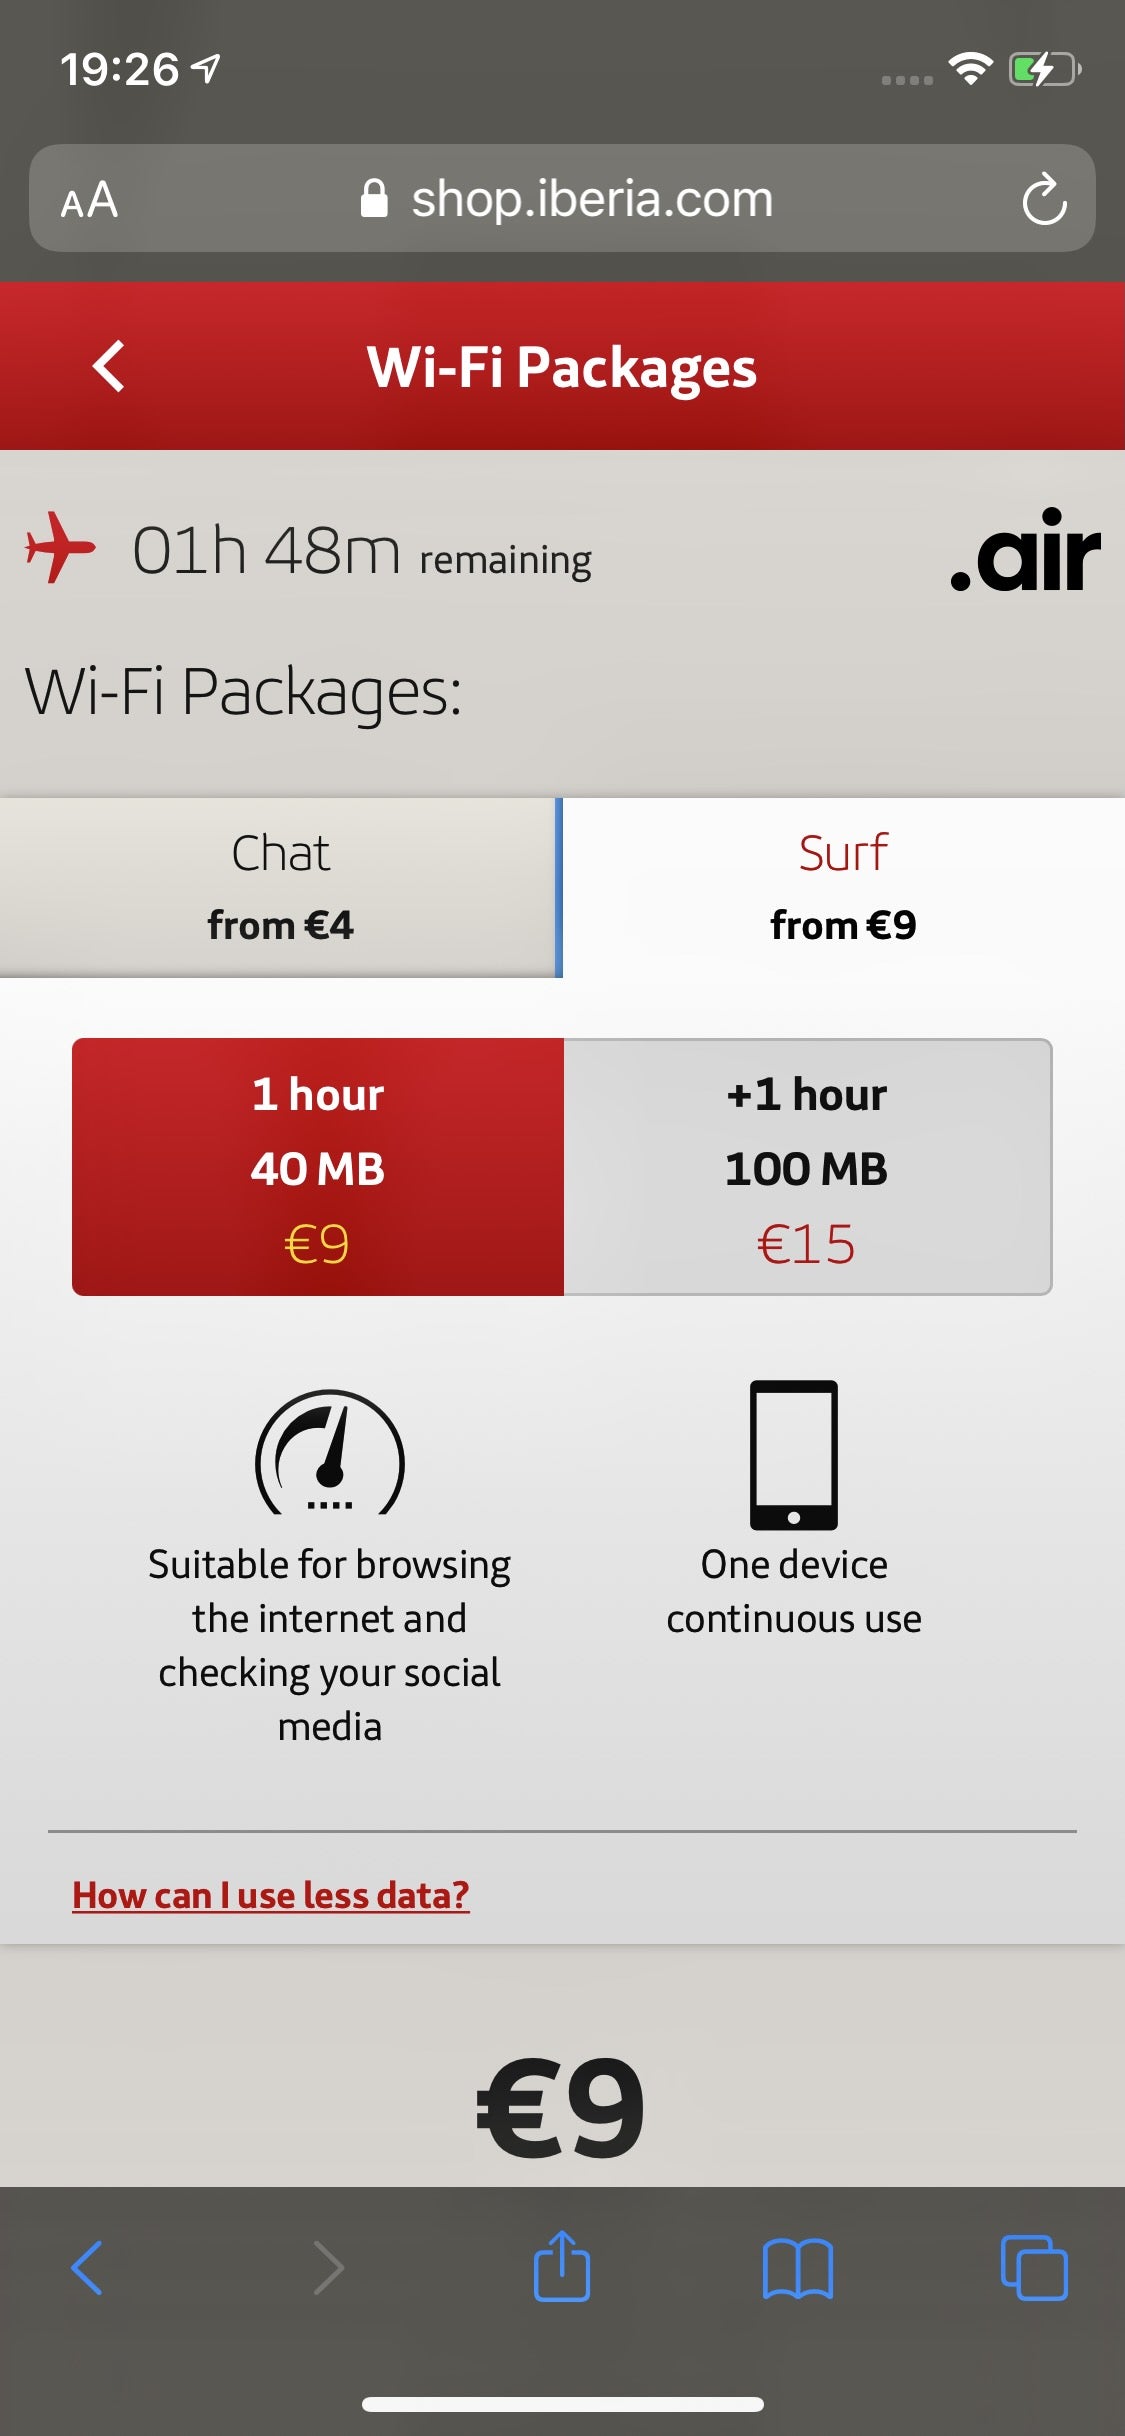 Iberia Wi-Fi Surf packages